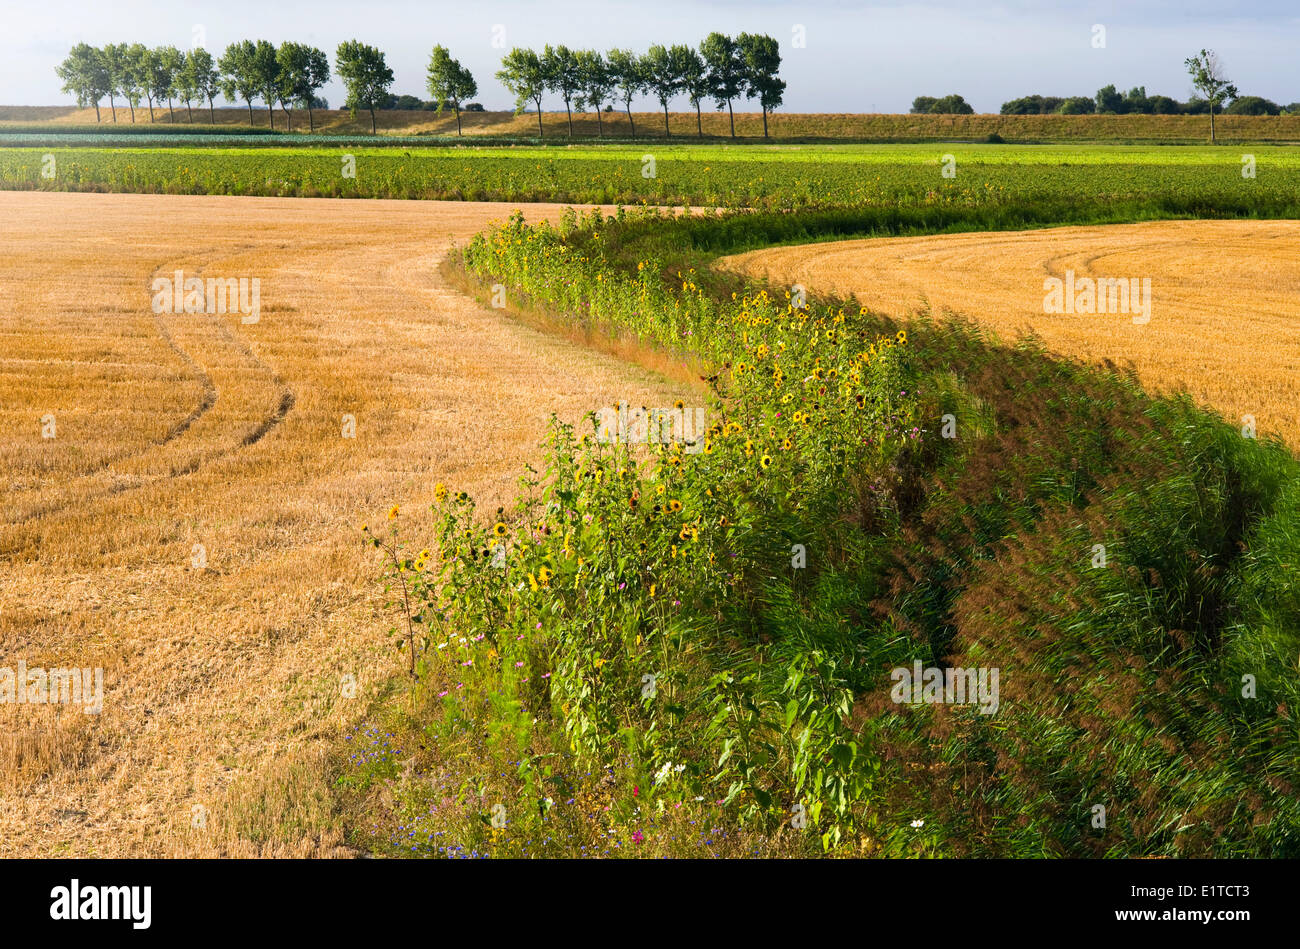 flowers along Agricultural field in a Dutch polder landscape; Stock Photo